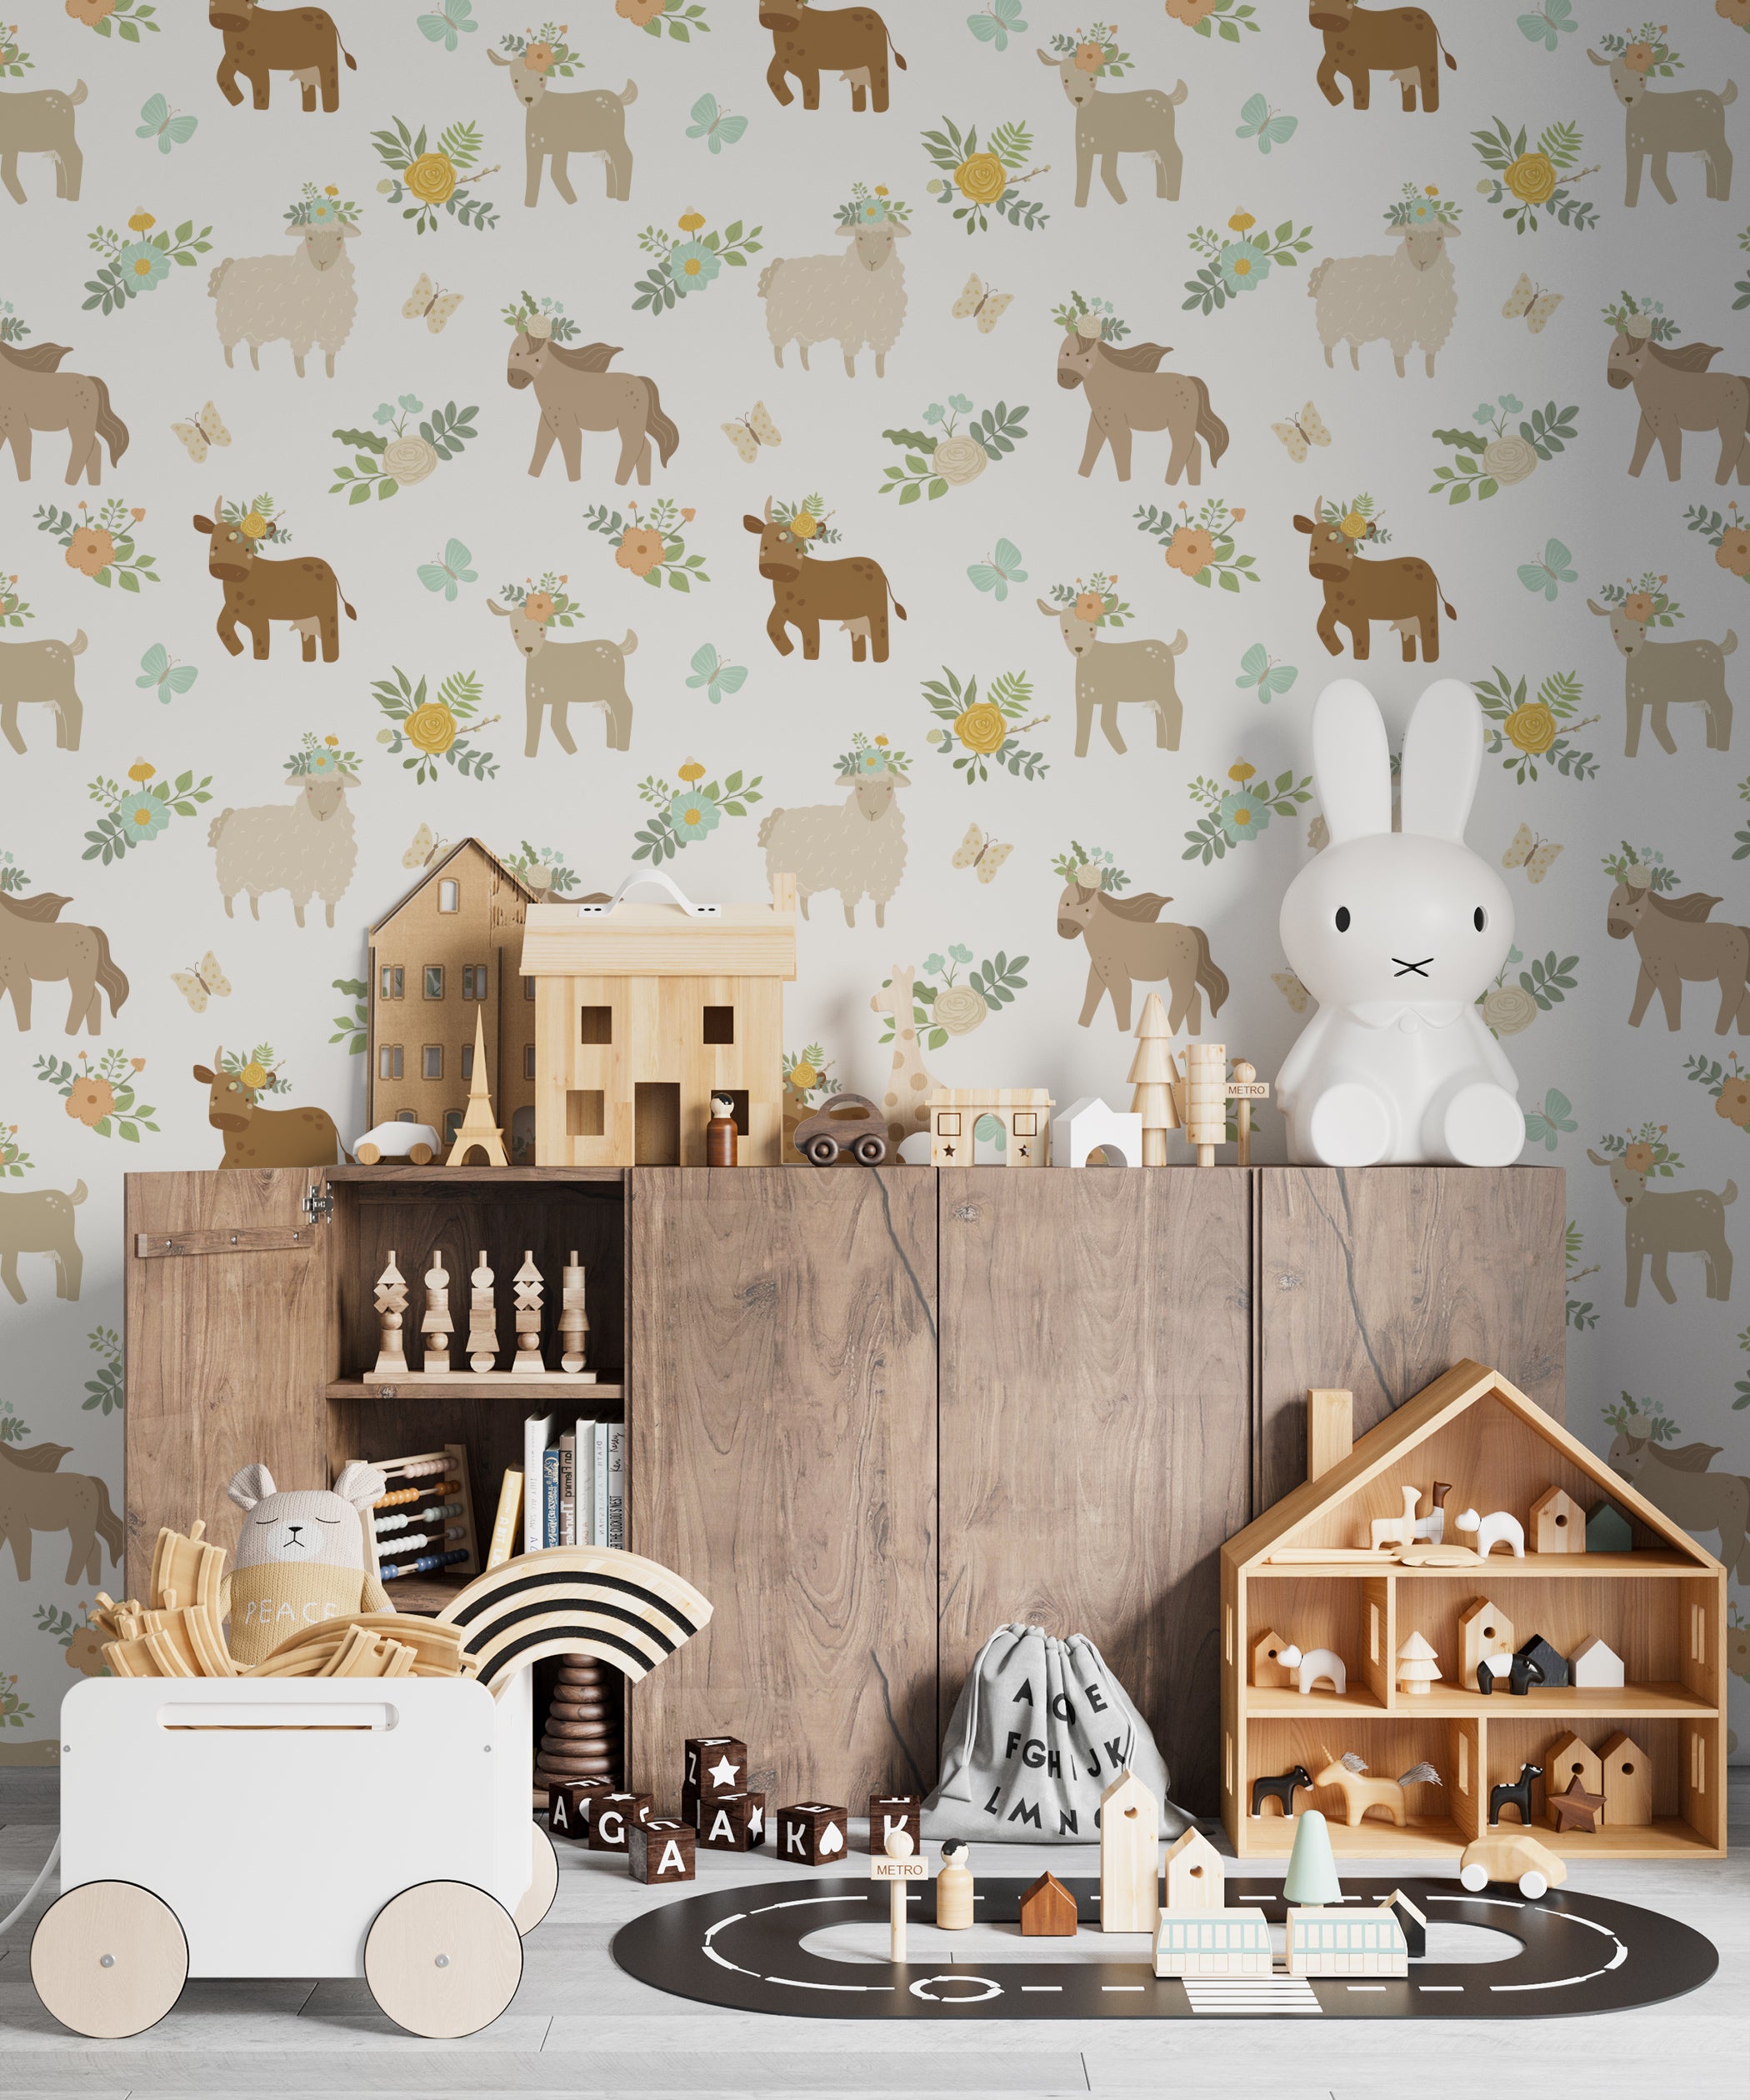 A child's playroom decorated with 'Spring Farm Animals Wallpaper' displaying soft-colored farm animals with floral decorations amidst greenery and butterflies, complementing the natural wood furniture and playful room setting